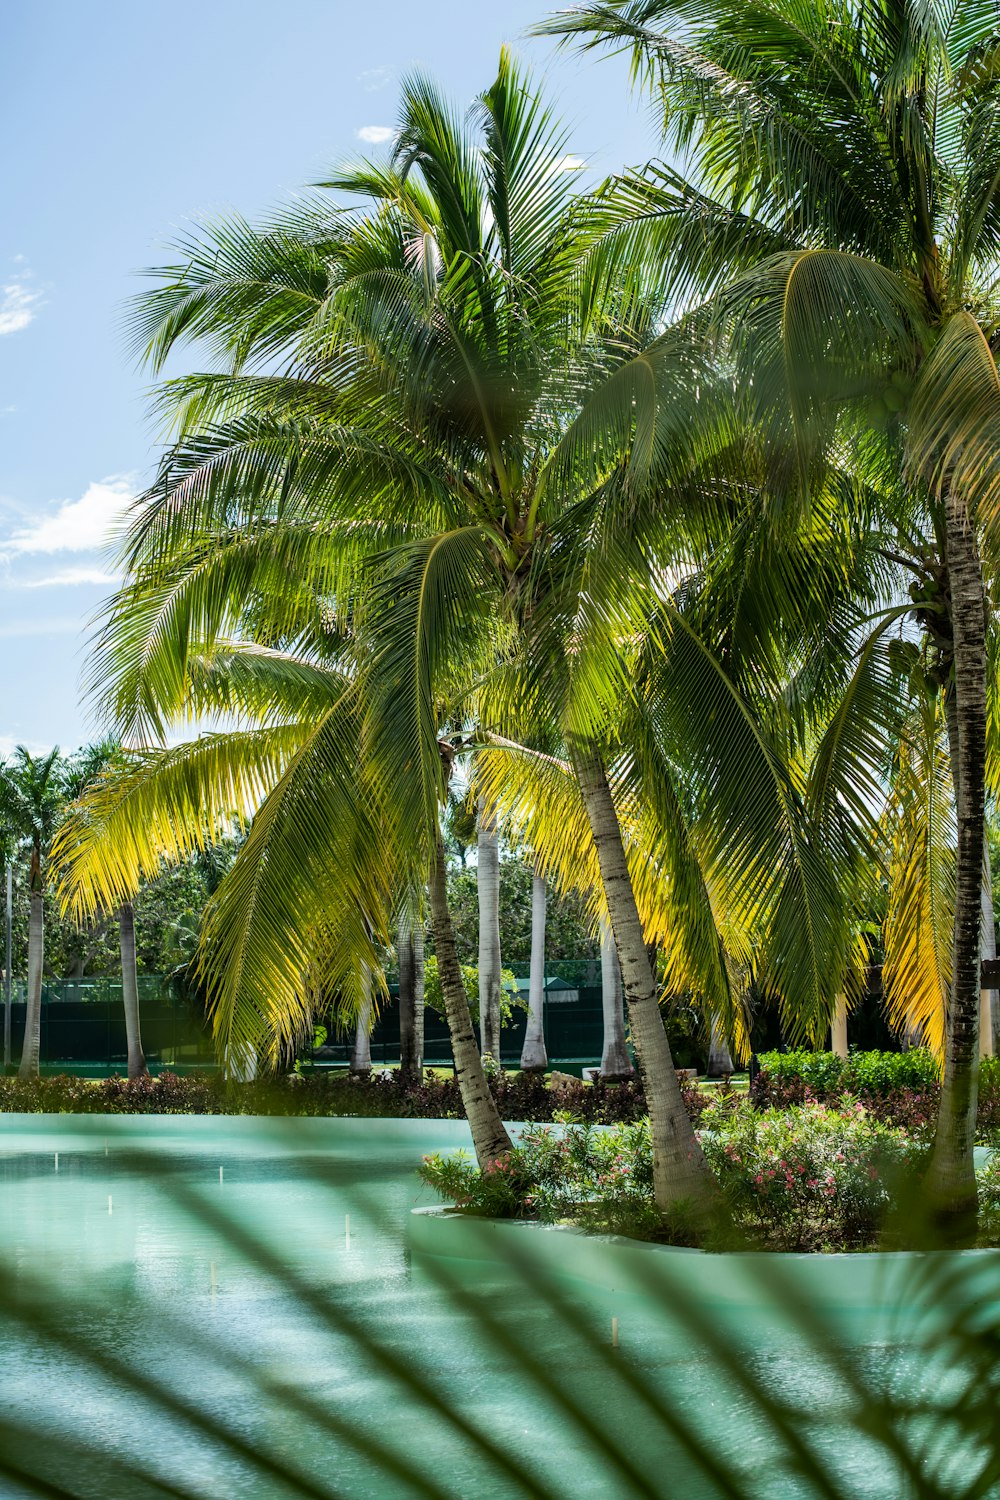 a pool surrounded by palm trees in a tropical setting